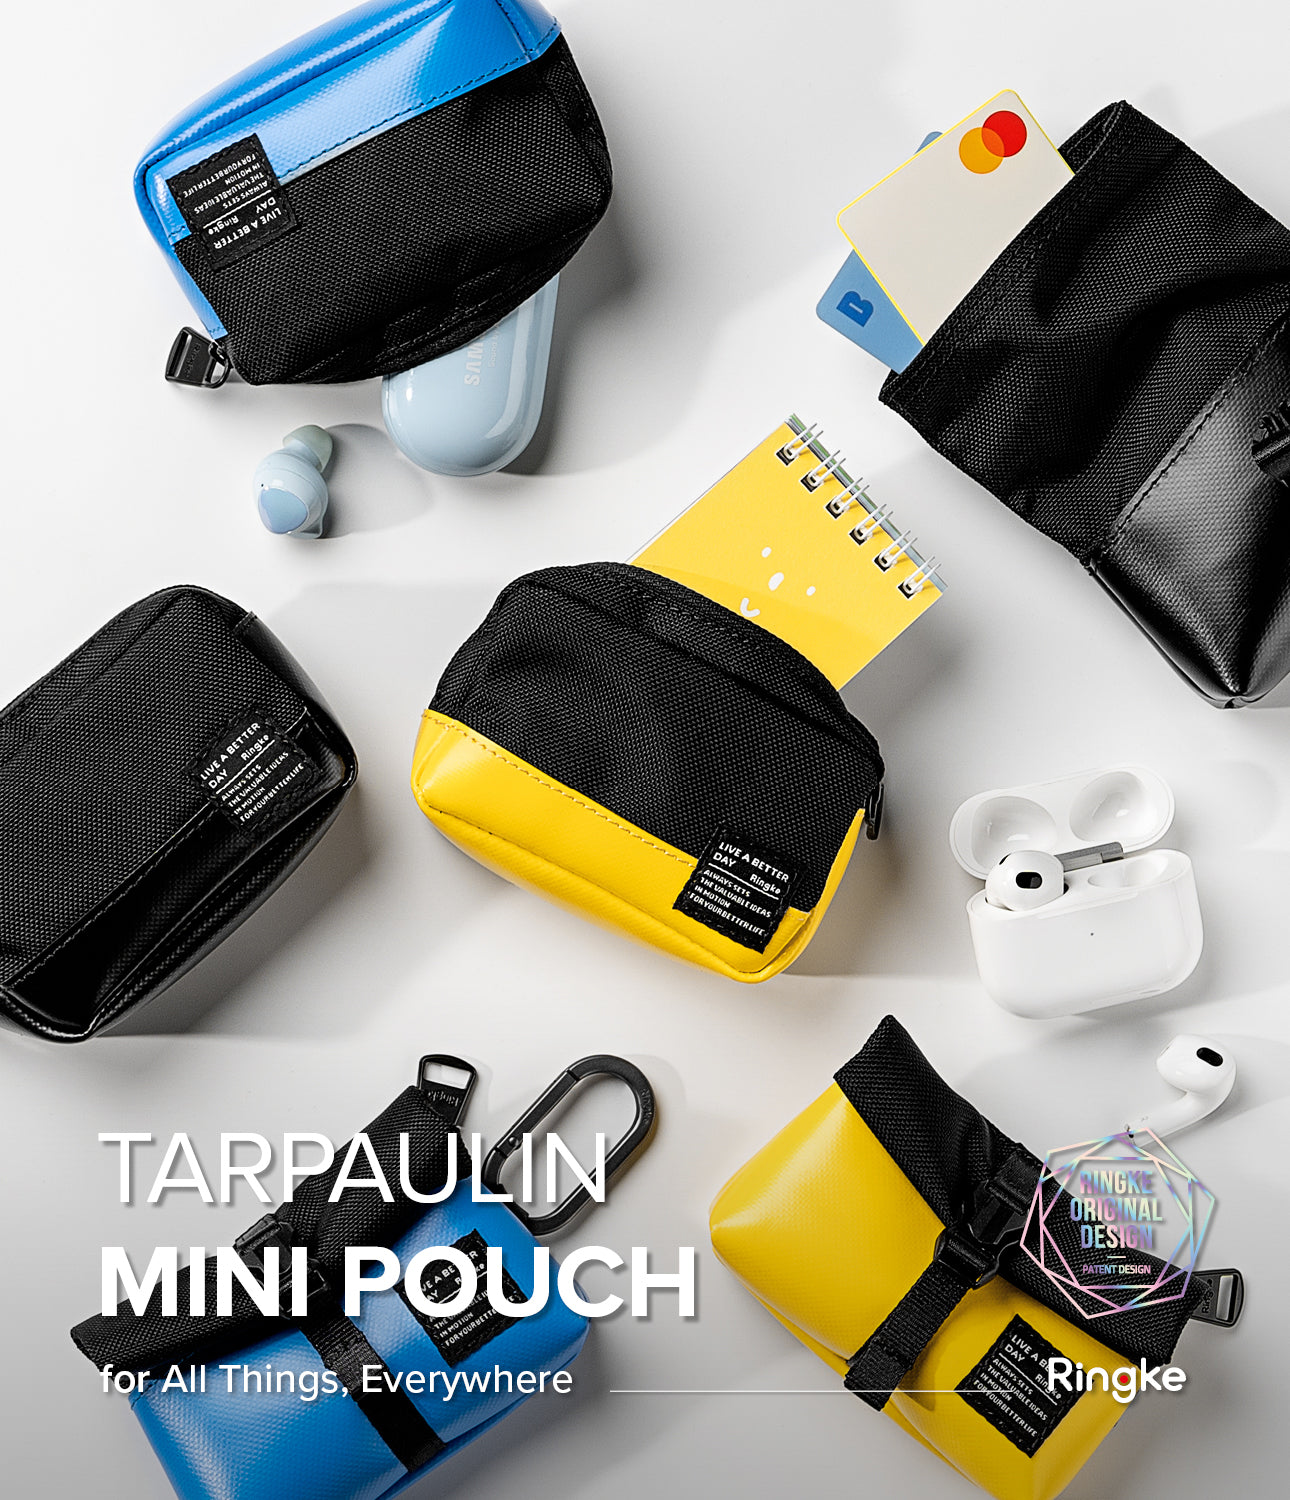 Mini Pouch Tarpaulin | Brick - Made of durable tarpaulin and nylon, Snap-button strap on the back, Brick-shaped design, Dimension of 100 x 60 x 35mm